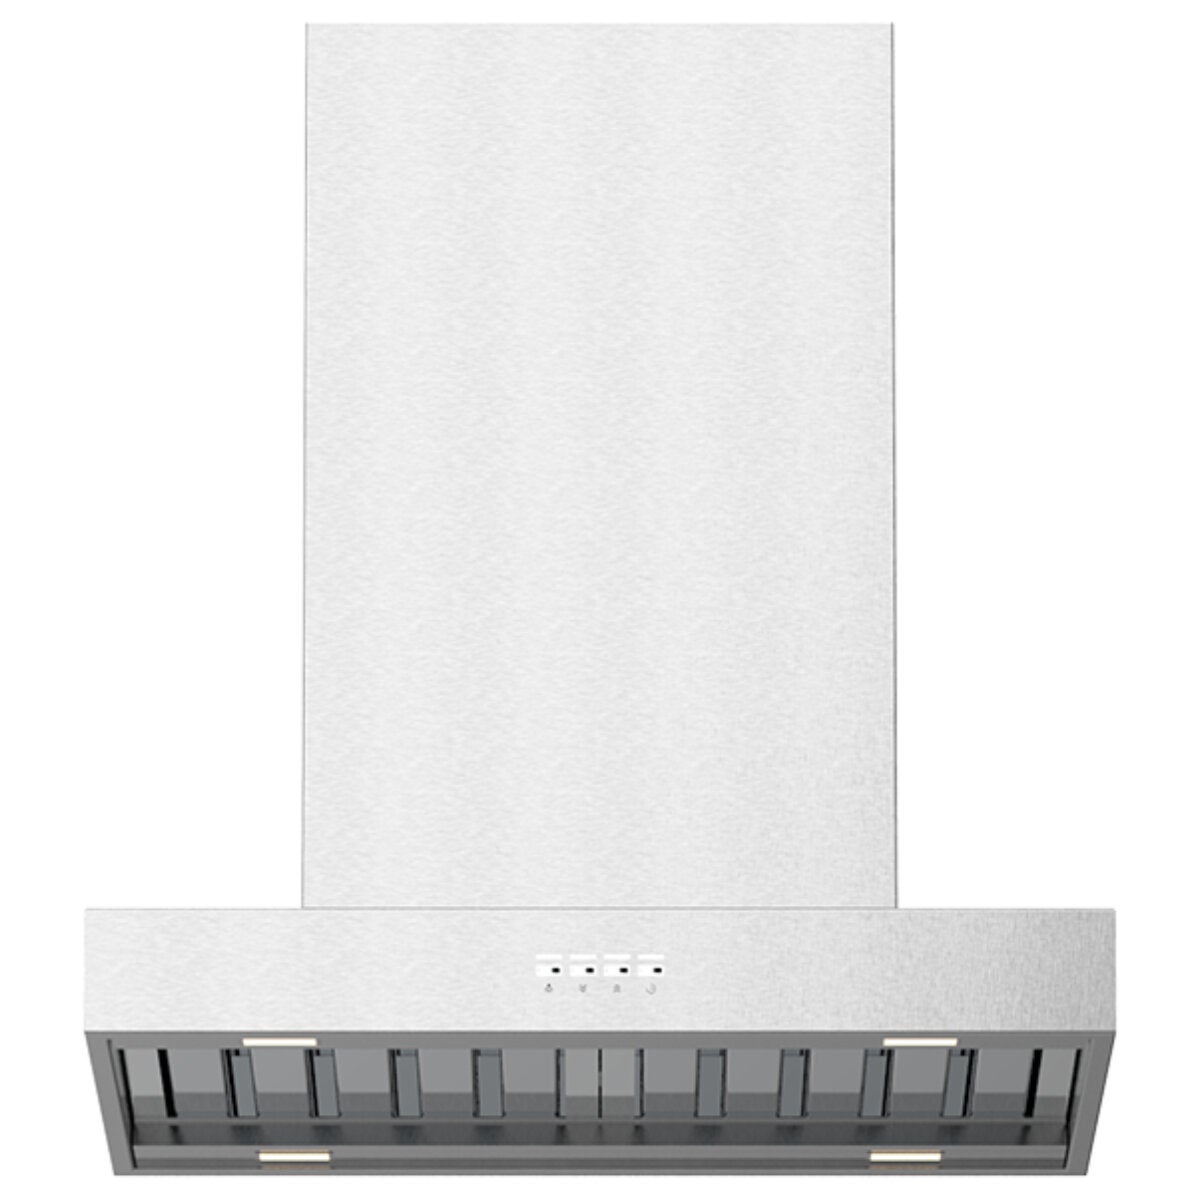 Image of Whispair Stockholm 60 Wall Mounted Canopy Rangehood with Top Ducted Power On Board Motor X5S06S5OPT